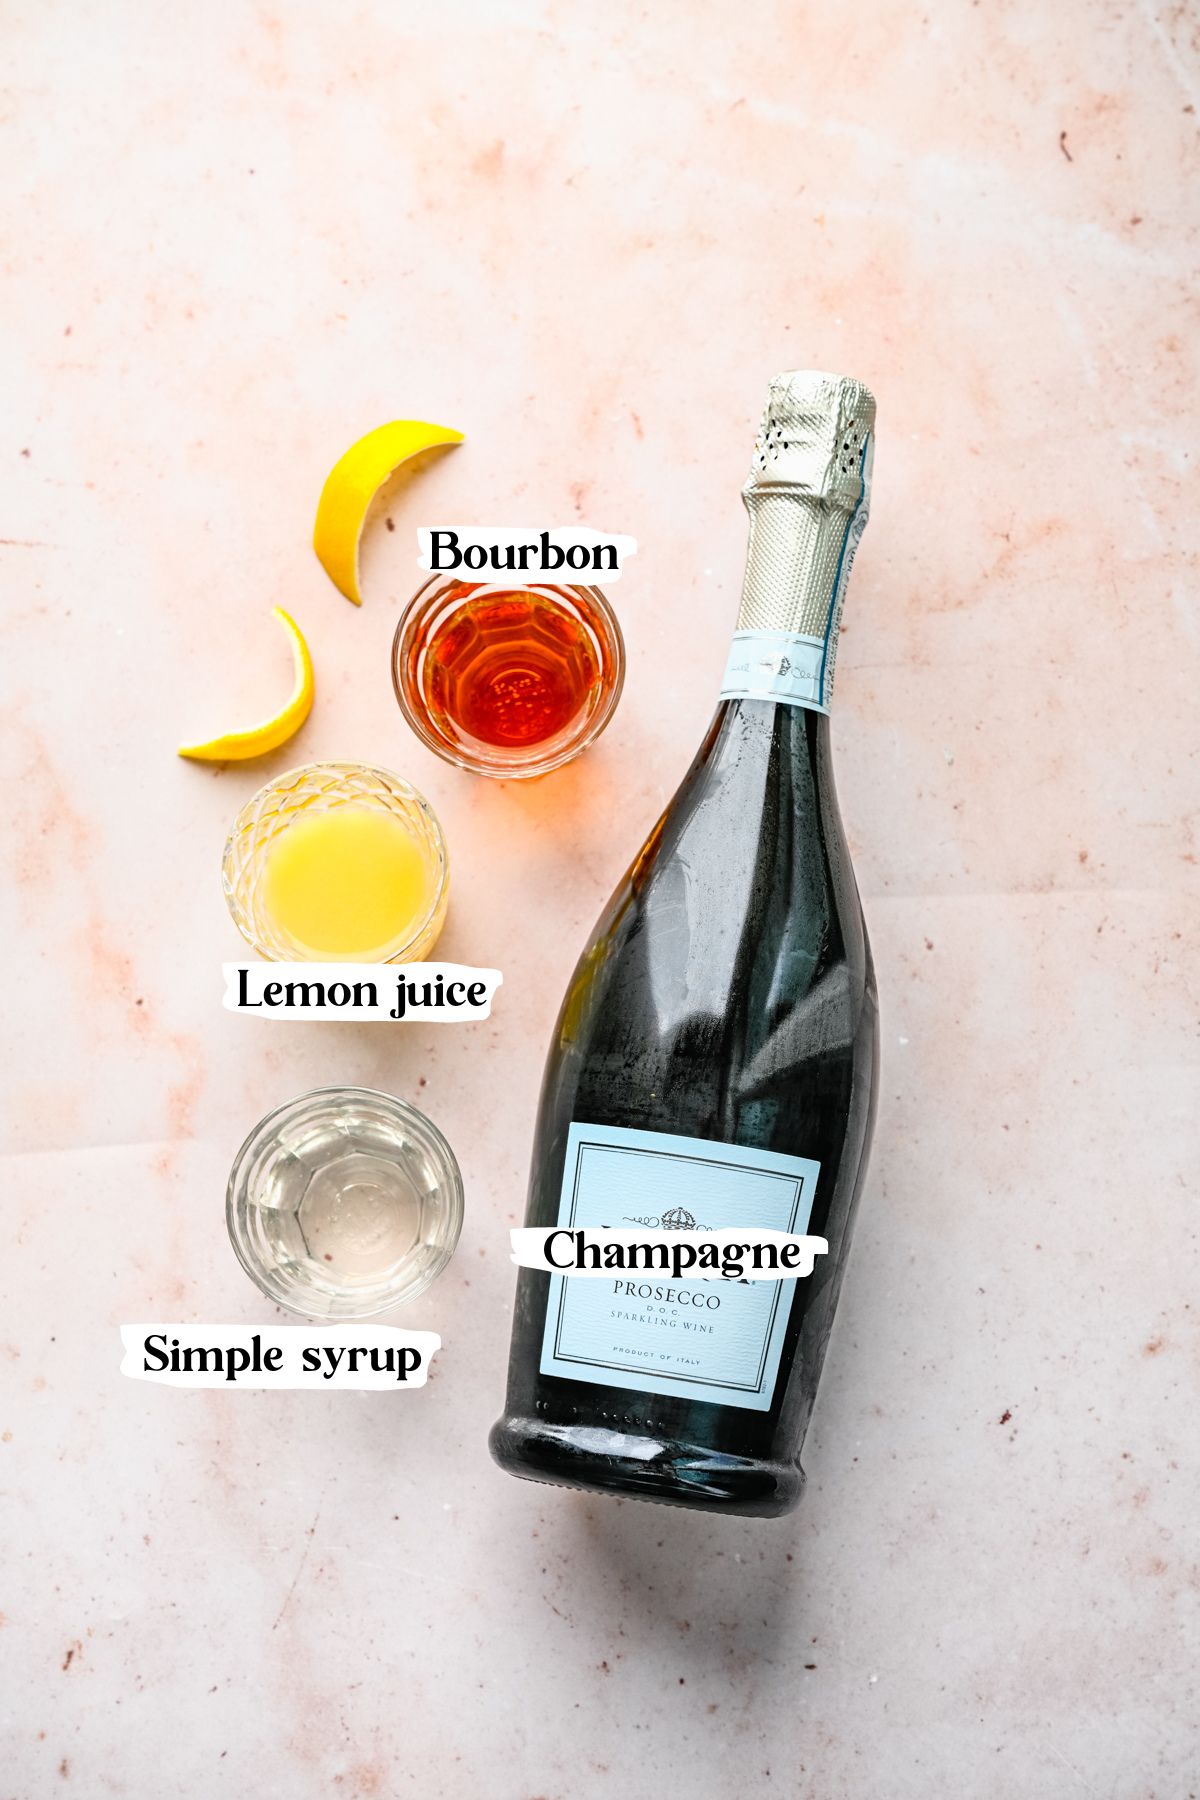 French 95 ingredients including bourbon and lemon juice.